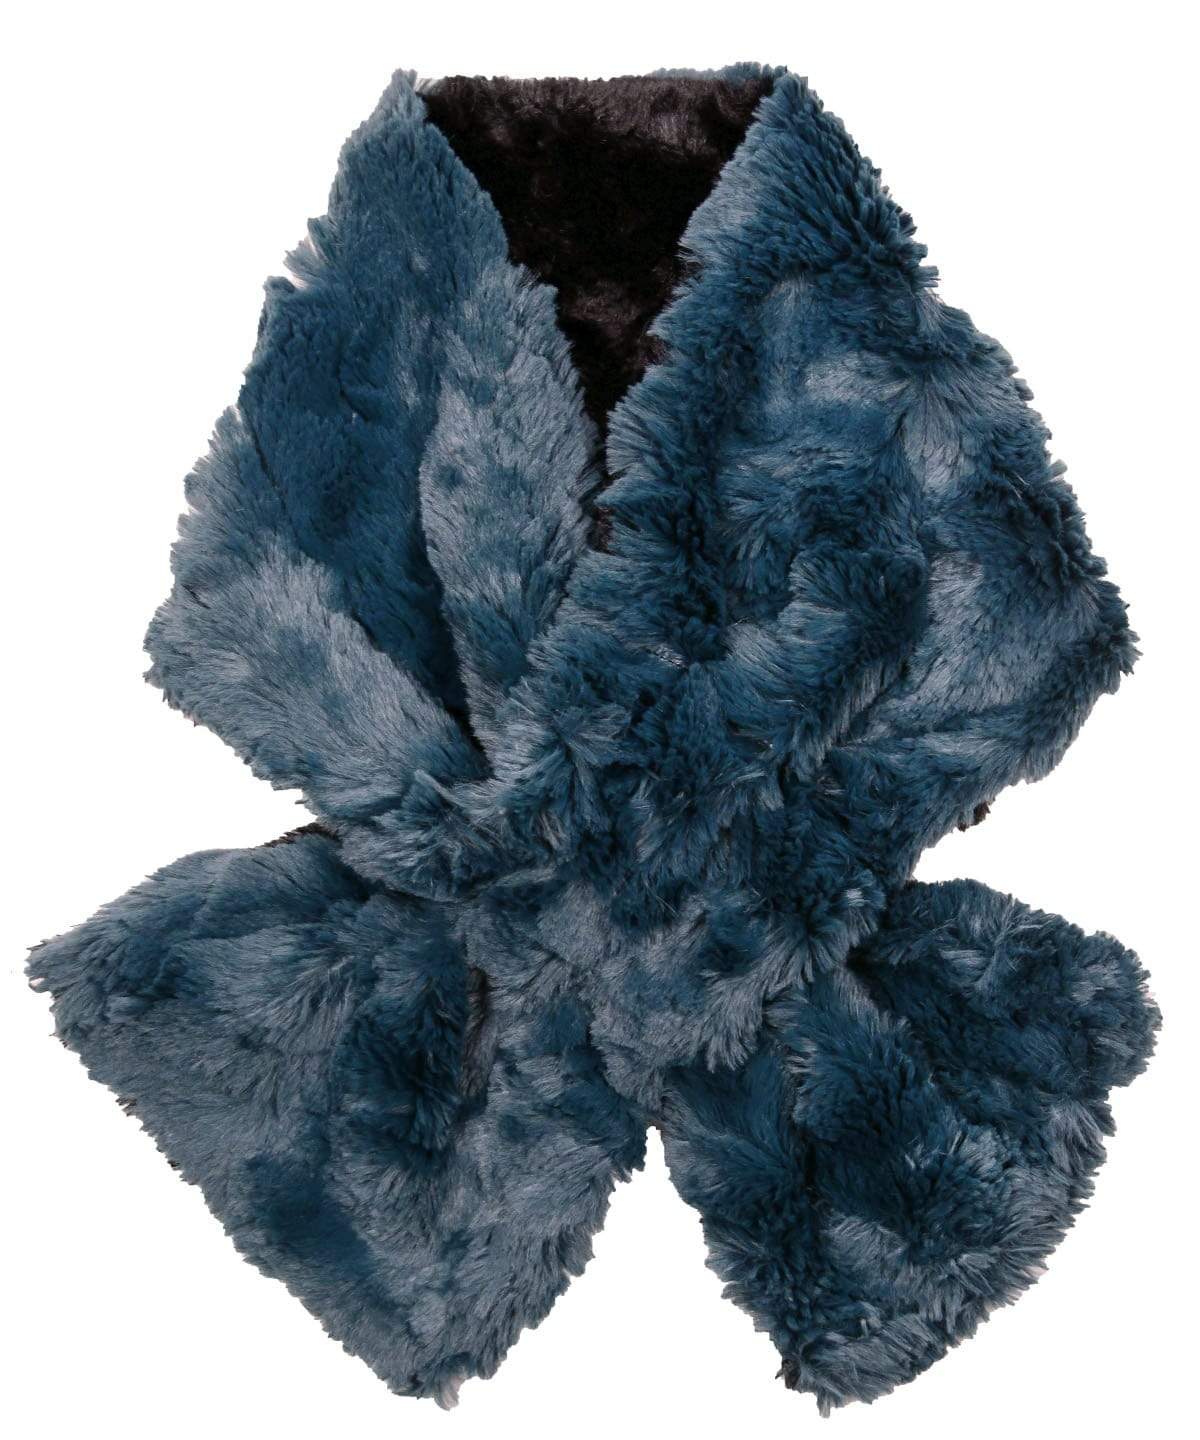 Product shot of Women’s reversible Pull Through Scarf | Peacock Pond Faux Fur, Blue / Teal with Cuddly Faux Fur in Black| Handmade in Seattle WA | Pandemonium Millinery